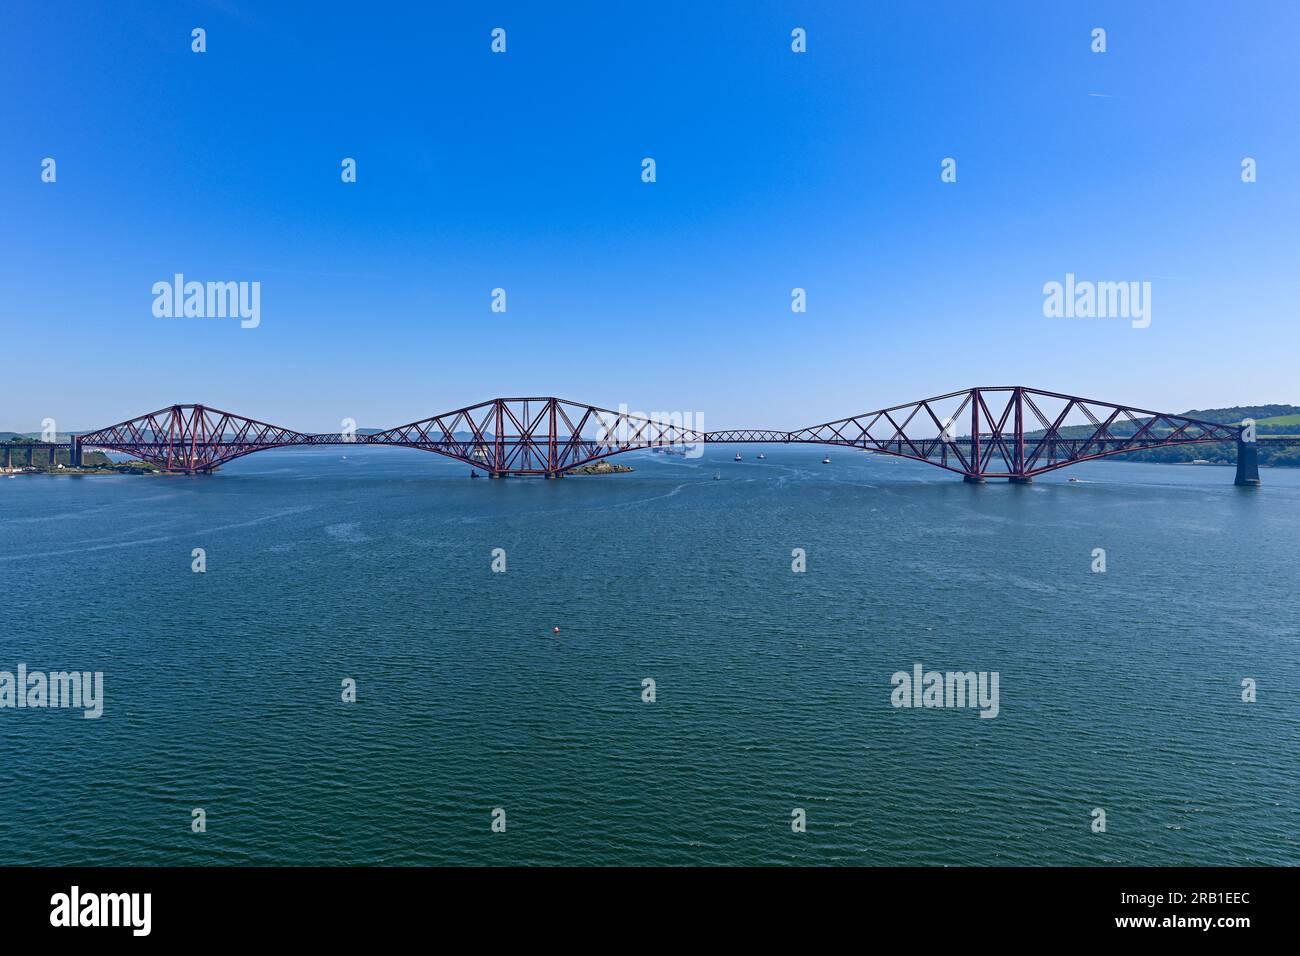 The Iconic Forth Rail Bridge Spanning The Firth Of Forth River On A Sunny Day, As Viewed From The Forth Road Bridge Stock Photo